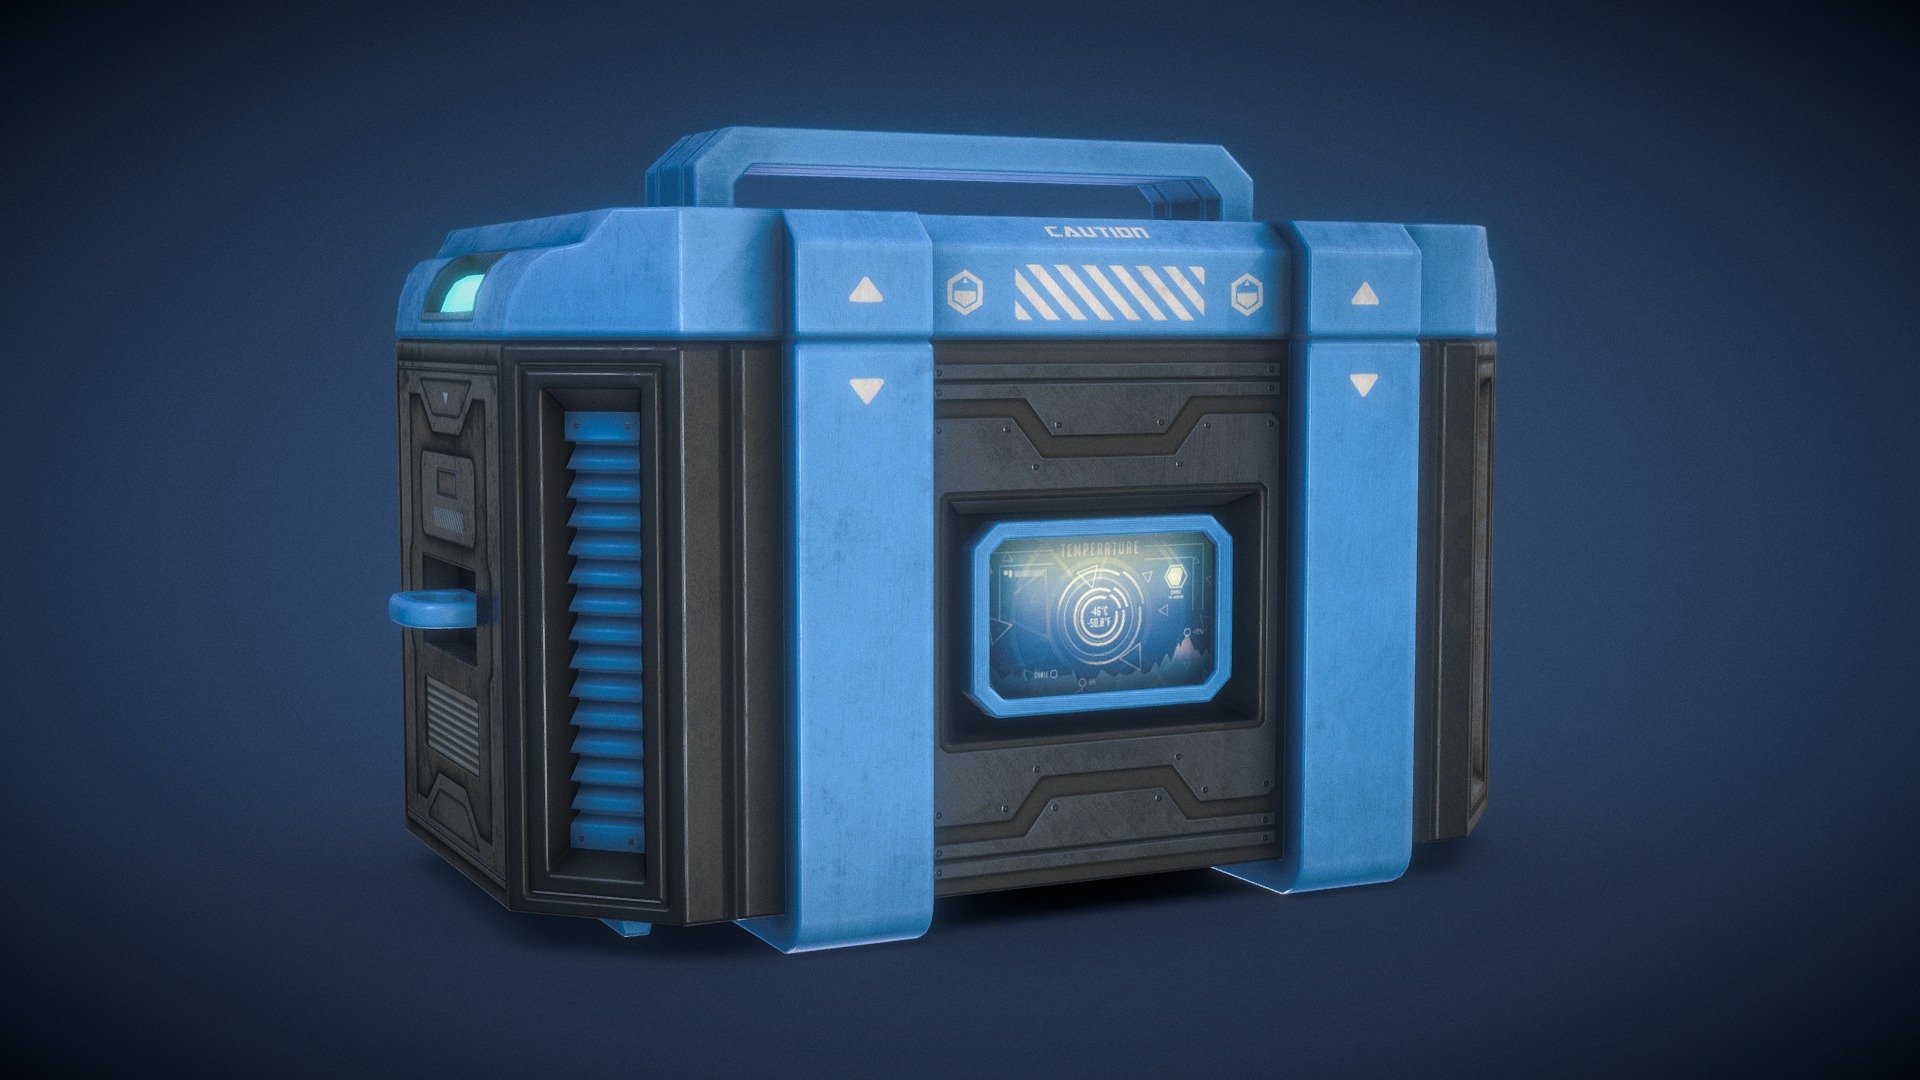 Speed Modeling and Texturing Video: https://youtu.be/xrh4BJ_vsZY

➥ Sci-Fi Cooler / Crate for any game project with only 2.7k Triangles.

➥ 4 Materials (Bottom_MAT, Top_MAT, Extras_MAT and Screen_MAT with x4096 textures)

➥ Unity Prefab model with materials included (Unity 5 Autodesk Interactive shader):

Preview Prefab

IMPORTANT!!! Exported with Unity 2019.3.15f1

➥ Additional .zip that includes:








Blender Editable File (Included Low Poly Unwrapped with textures and HighPoly Original mesh without textures, used for bakes).







Textures







Unity Package (Model, Material, Textures and Prefab)







Original LP FBX







Thank you message :)



➥ Some Extra Screenshots:
Preview Blender Editable - Sci-Fi Crate - Buy Royalty Free 3D model by Agustín Hönnun (@Agustin_Honnun) 3d model